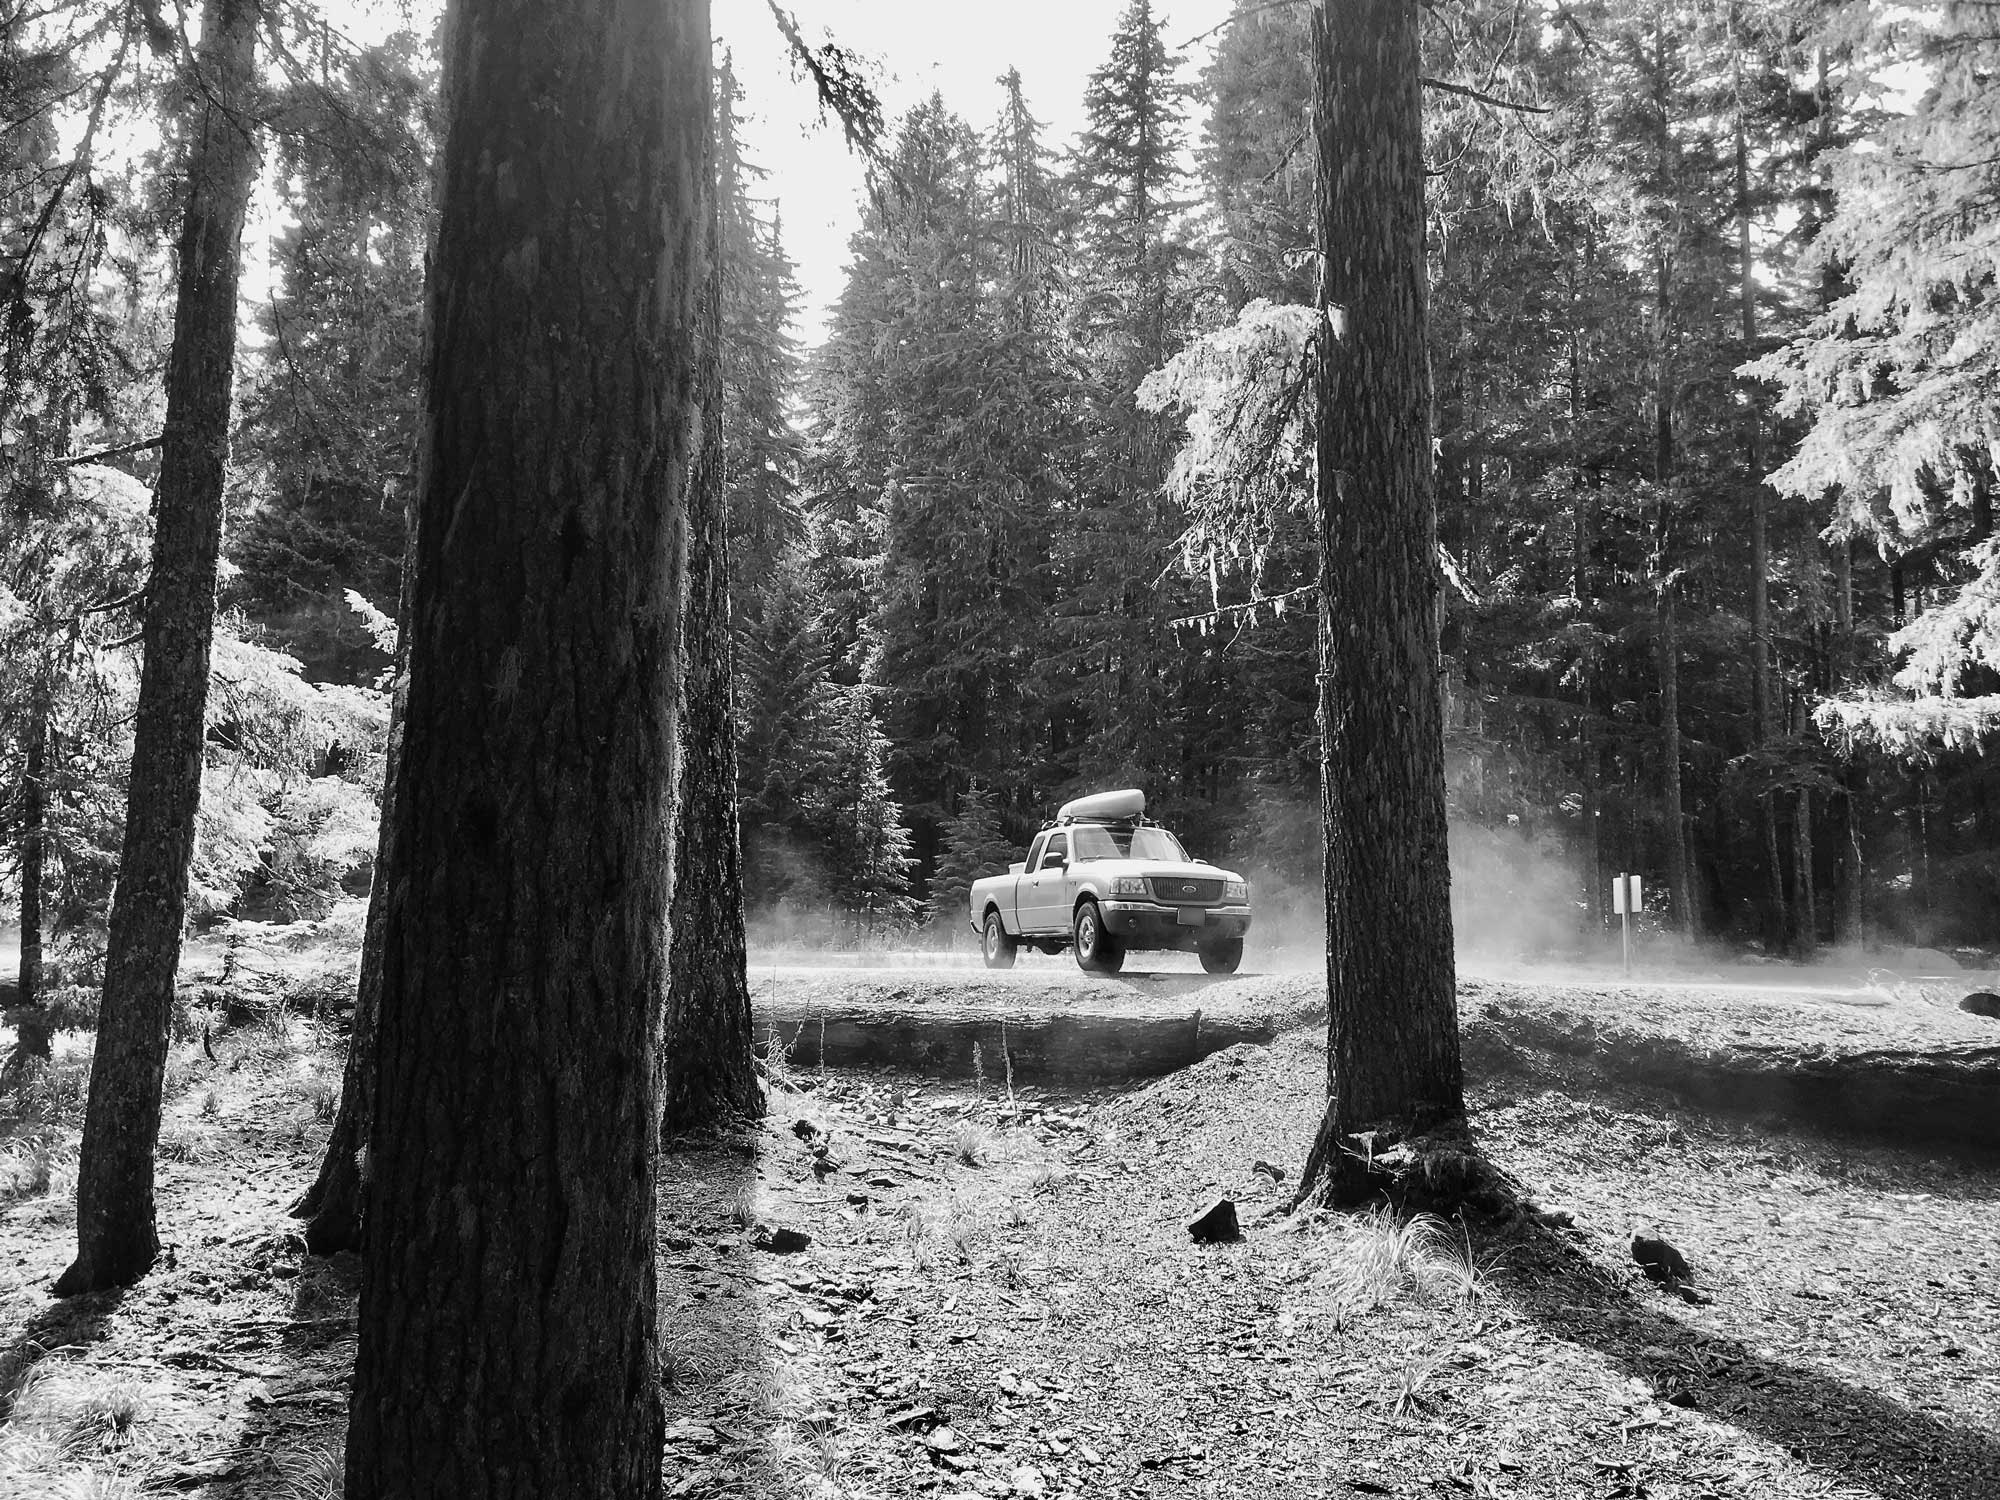 Black and white trees in front of a small truck with a kayak on top